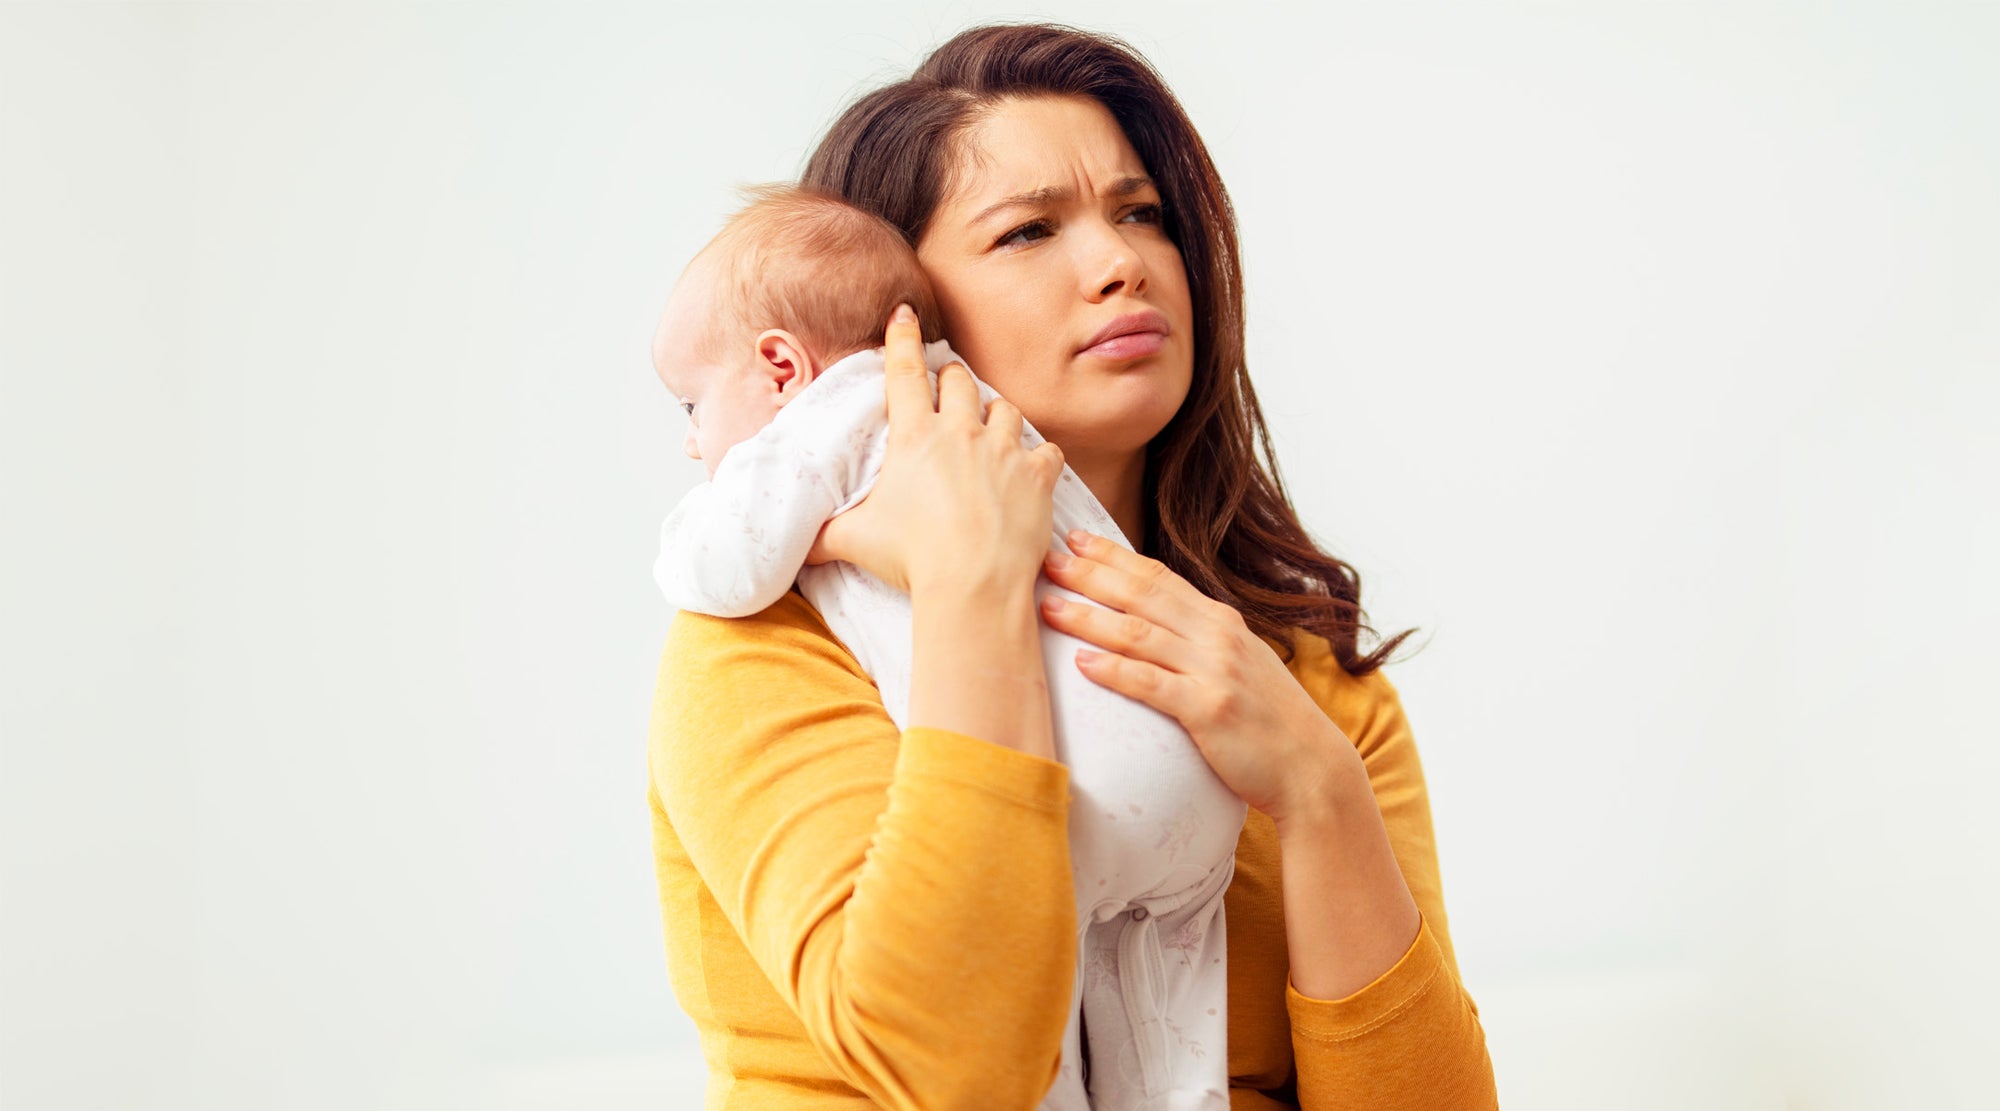 What are the Warning Signs of Postpartum Depression?